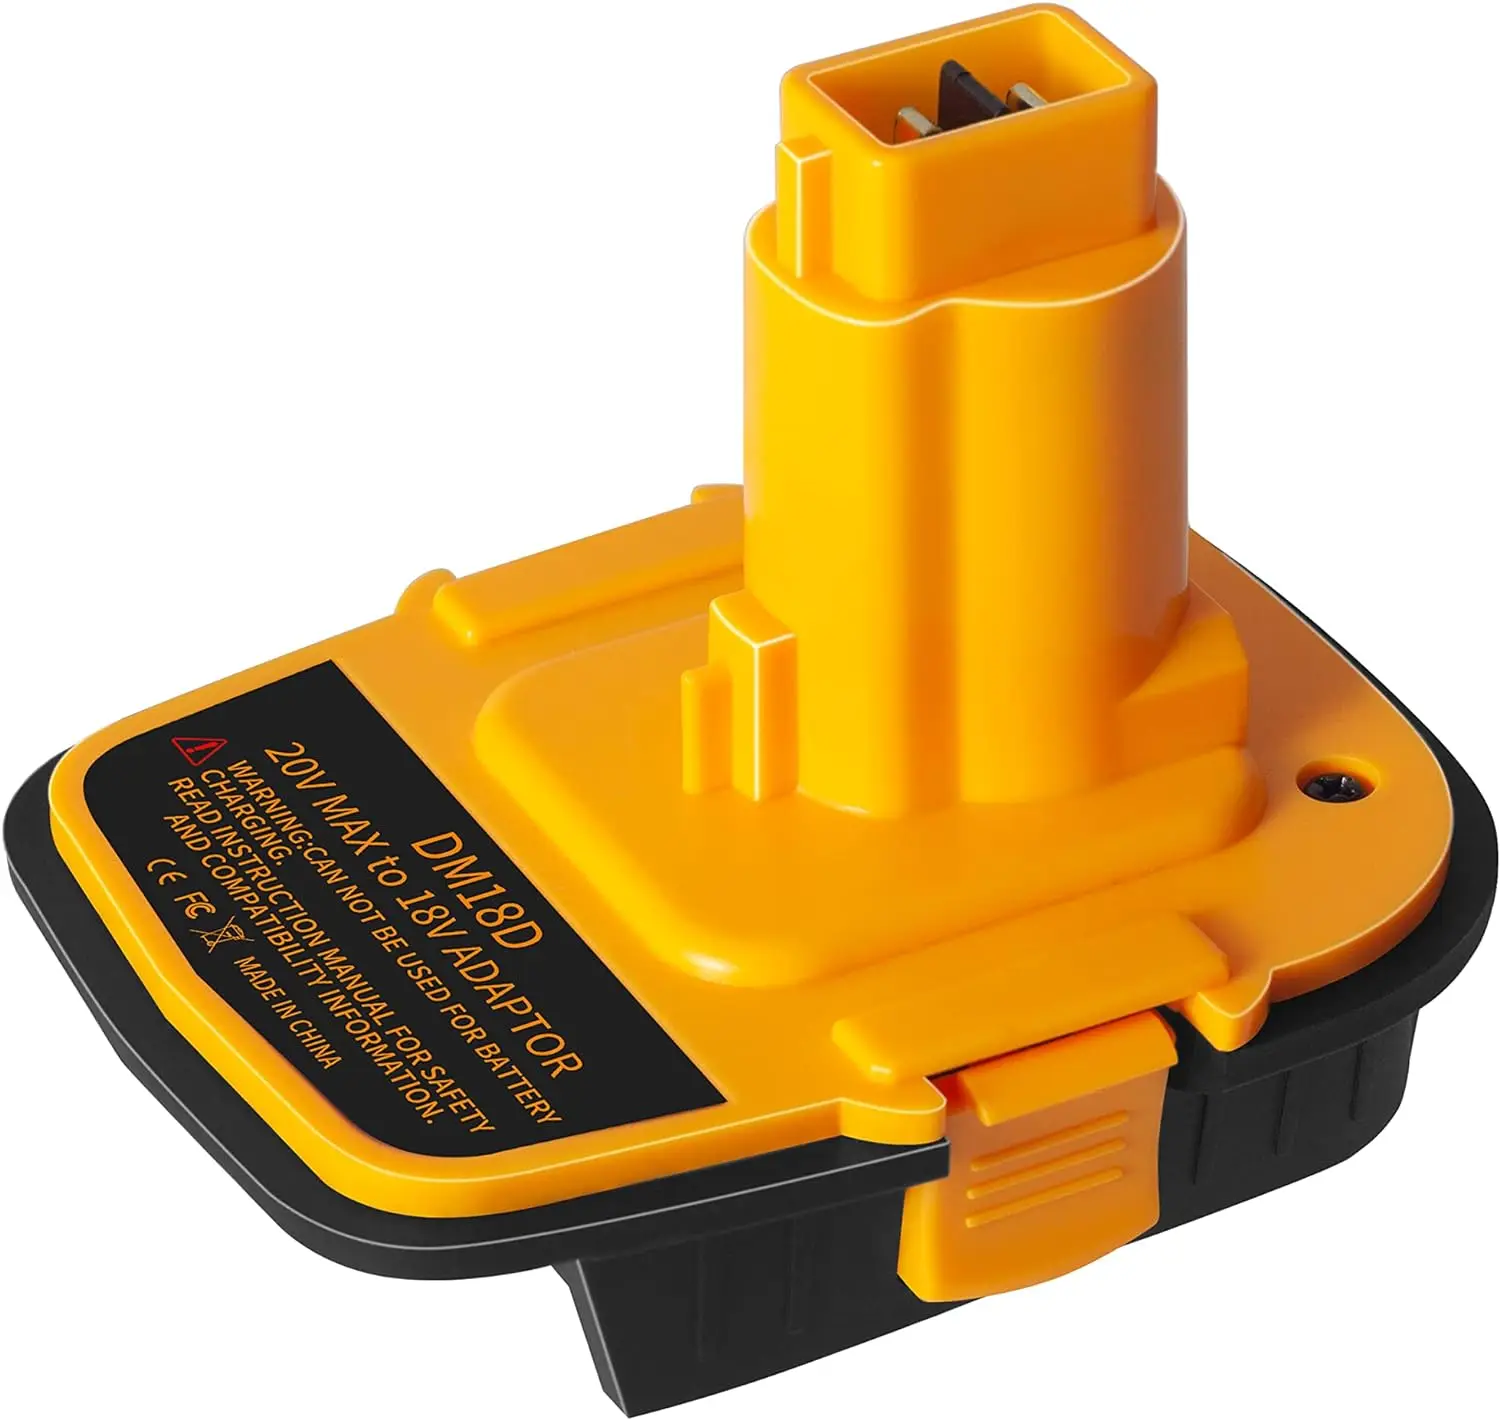 Battery Adapter with USB Convert for DeWalt 20V for Milwaukee 18V Lithium Battery to For DeWalt NiCad & NiMh Battery Power Tools